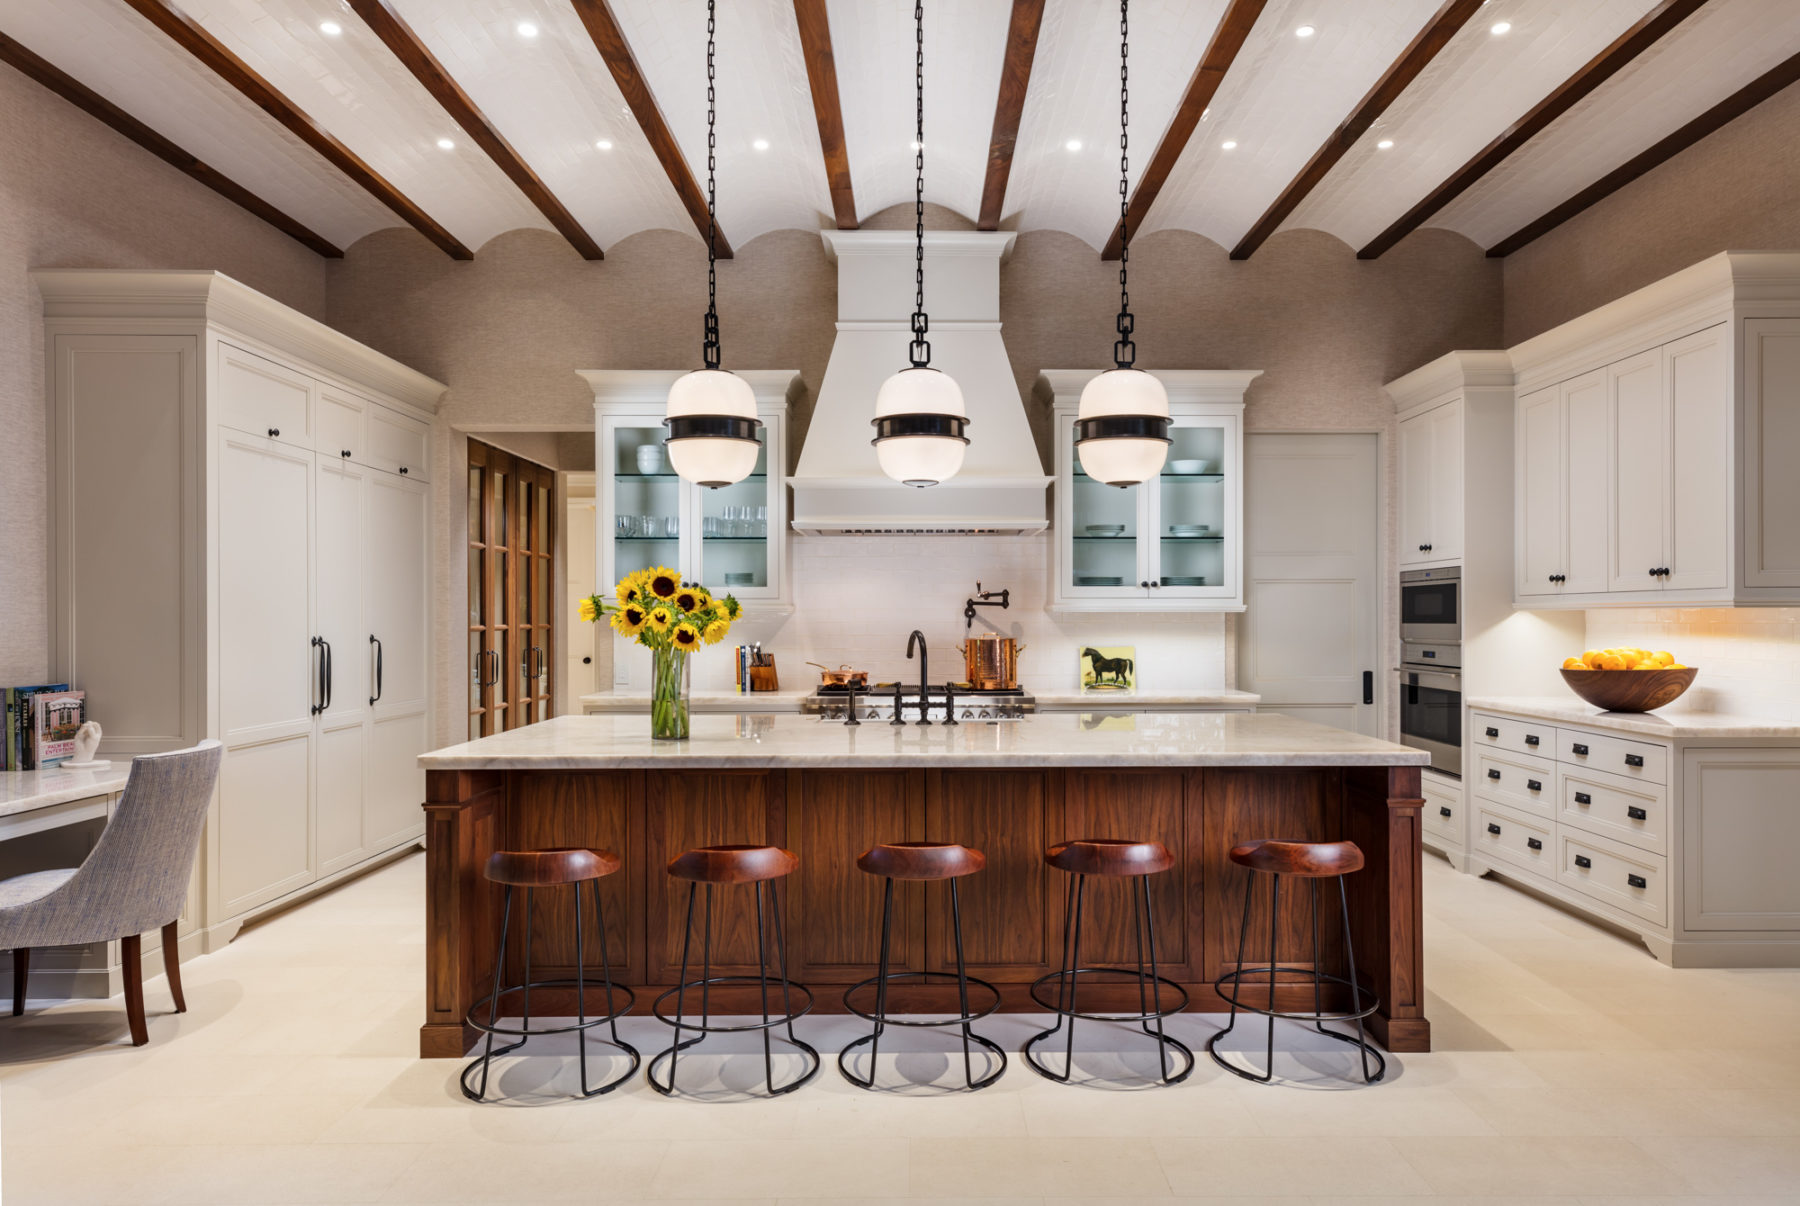 image of Equestrian Estate kitchen with neutral cabinets, wood accents and brown barstools